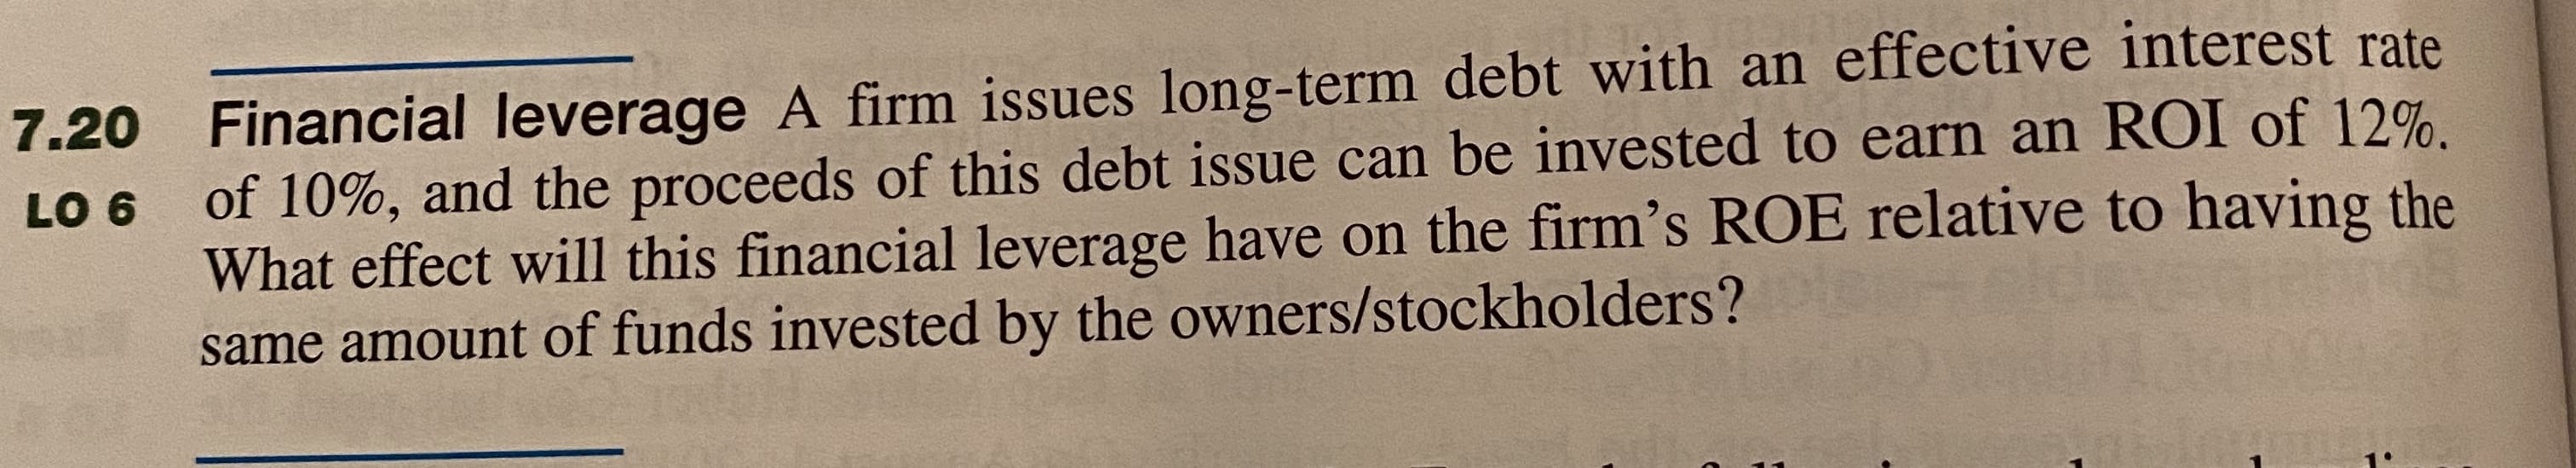 Financial leverage A firm issues long-term debt with an effective interest rate
of 10%, and the proceeds of this debt issue can be invested to earn an ROI of 12%.
What effect will this financial leverage have on the firm's ROE relative to having the
same amount of funds invested by the owners/stockholders?
